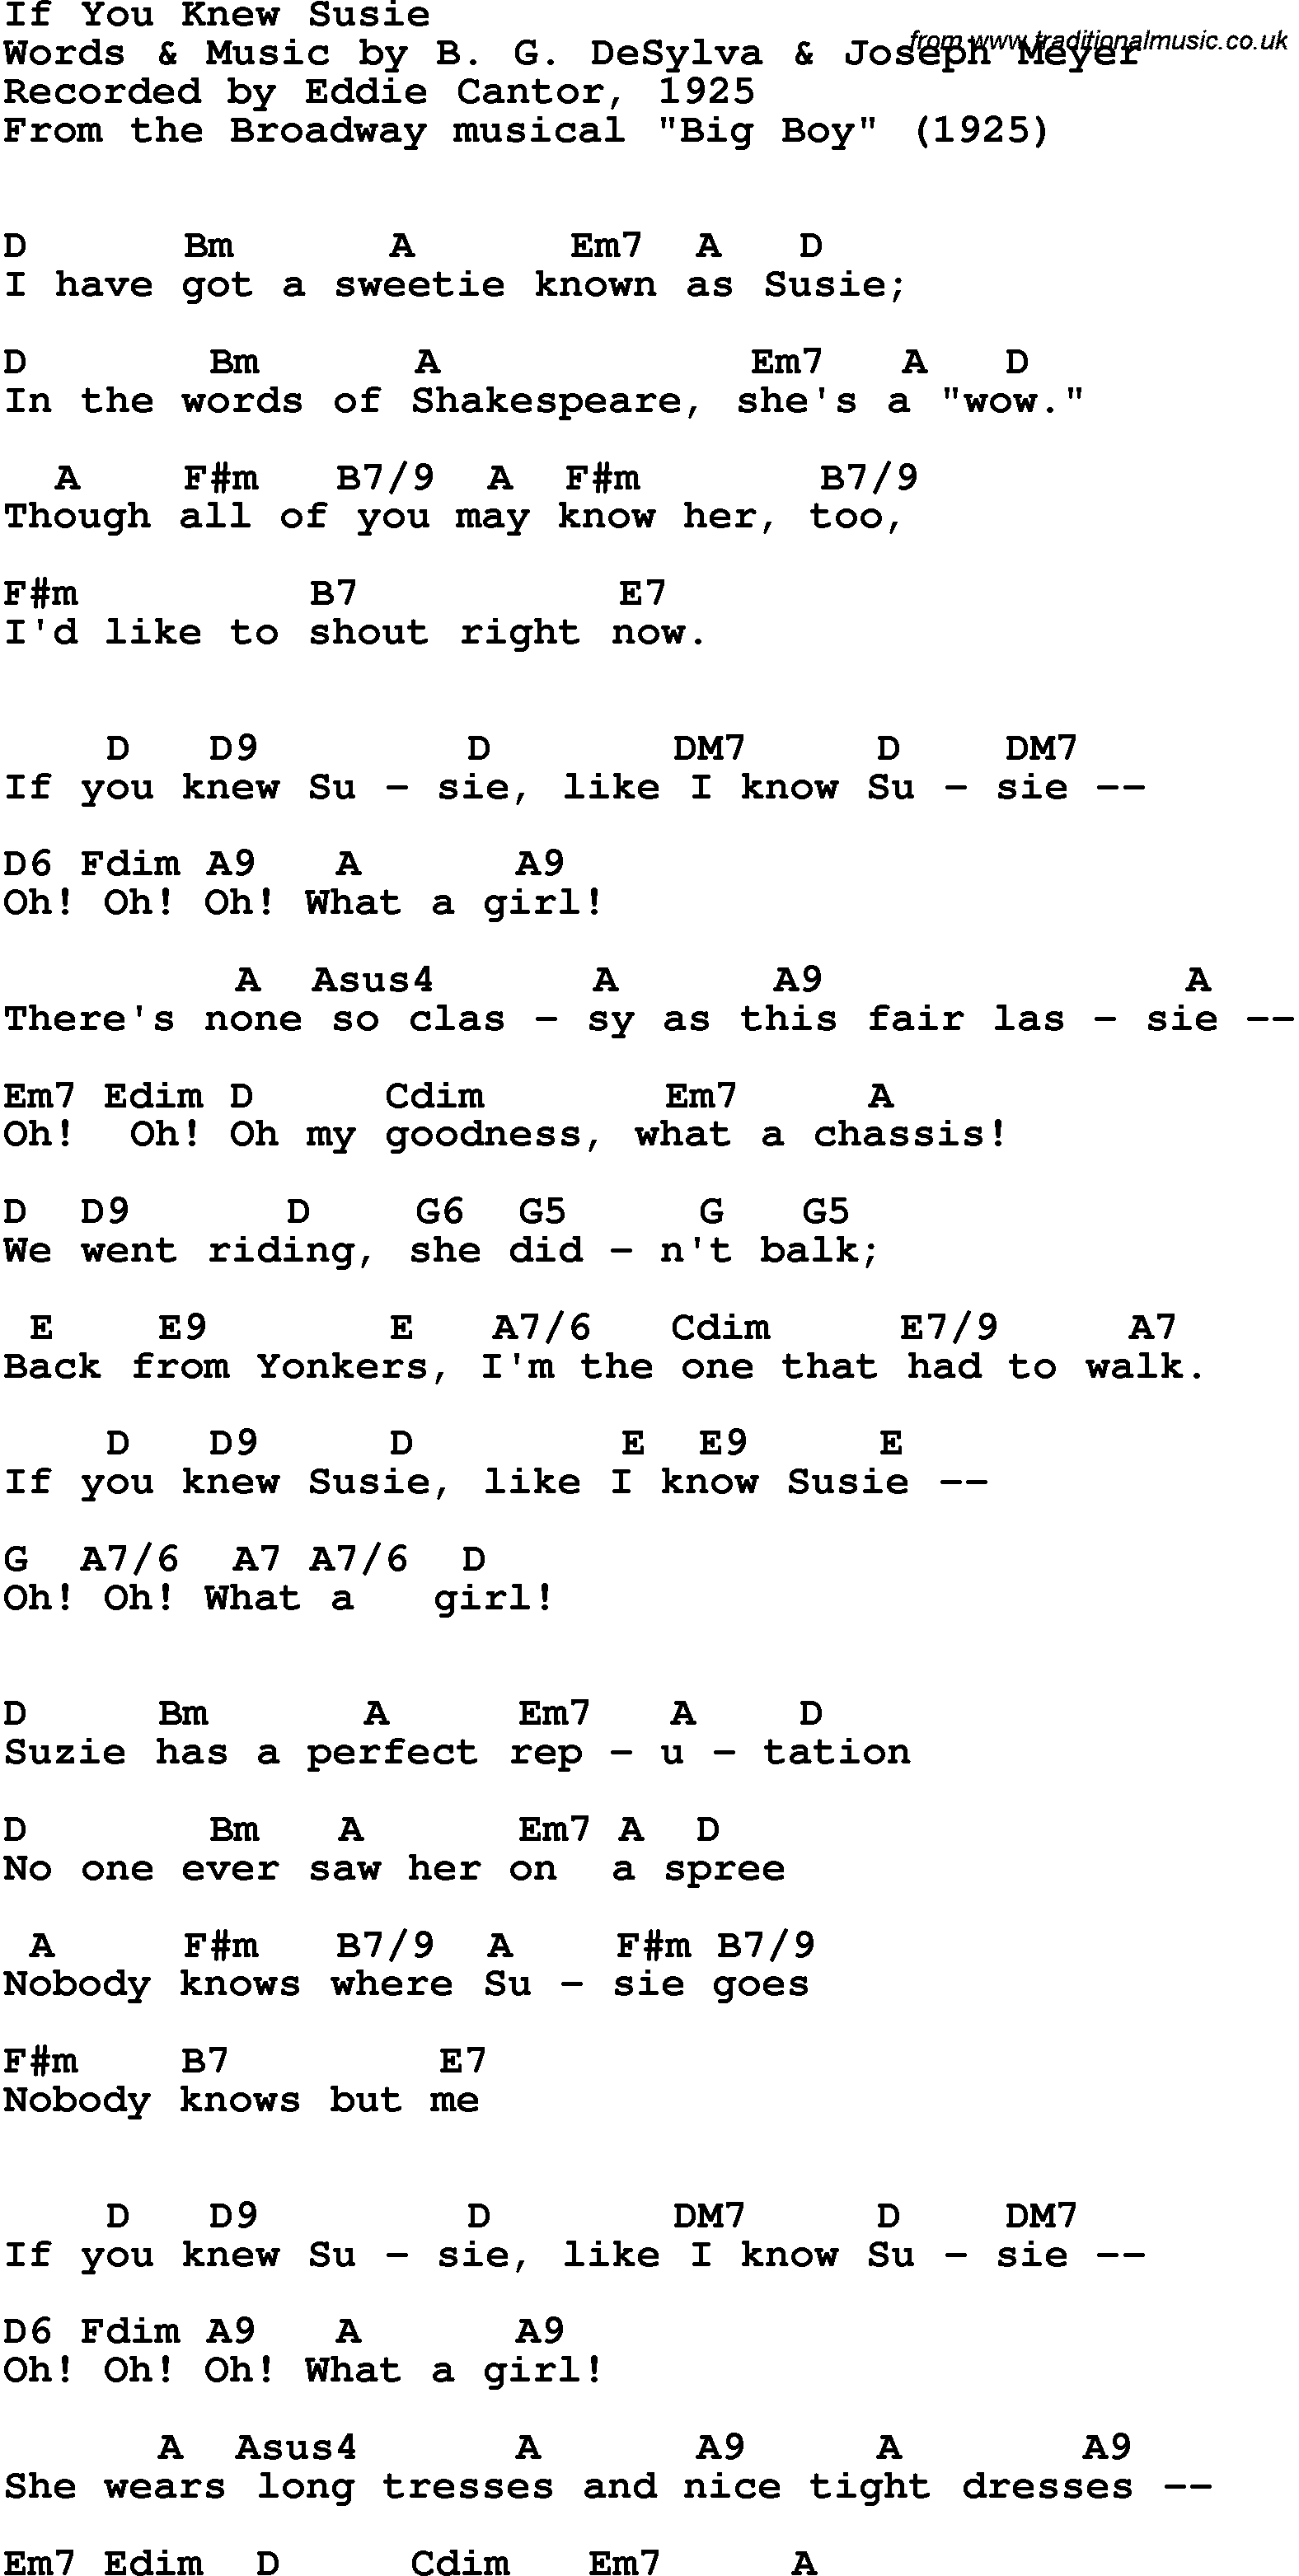 Song Lyrics with guitar chords for If You Knew Susie - Eddie Cantor, 1925